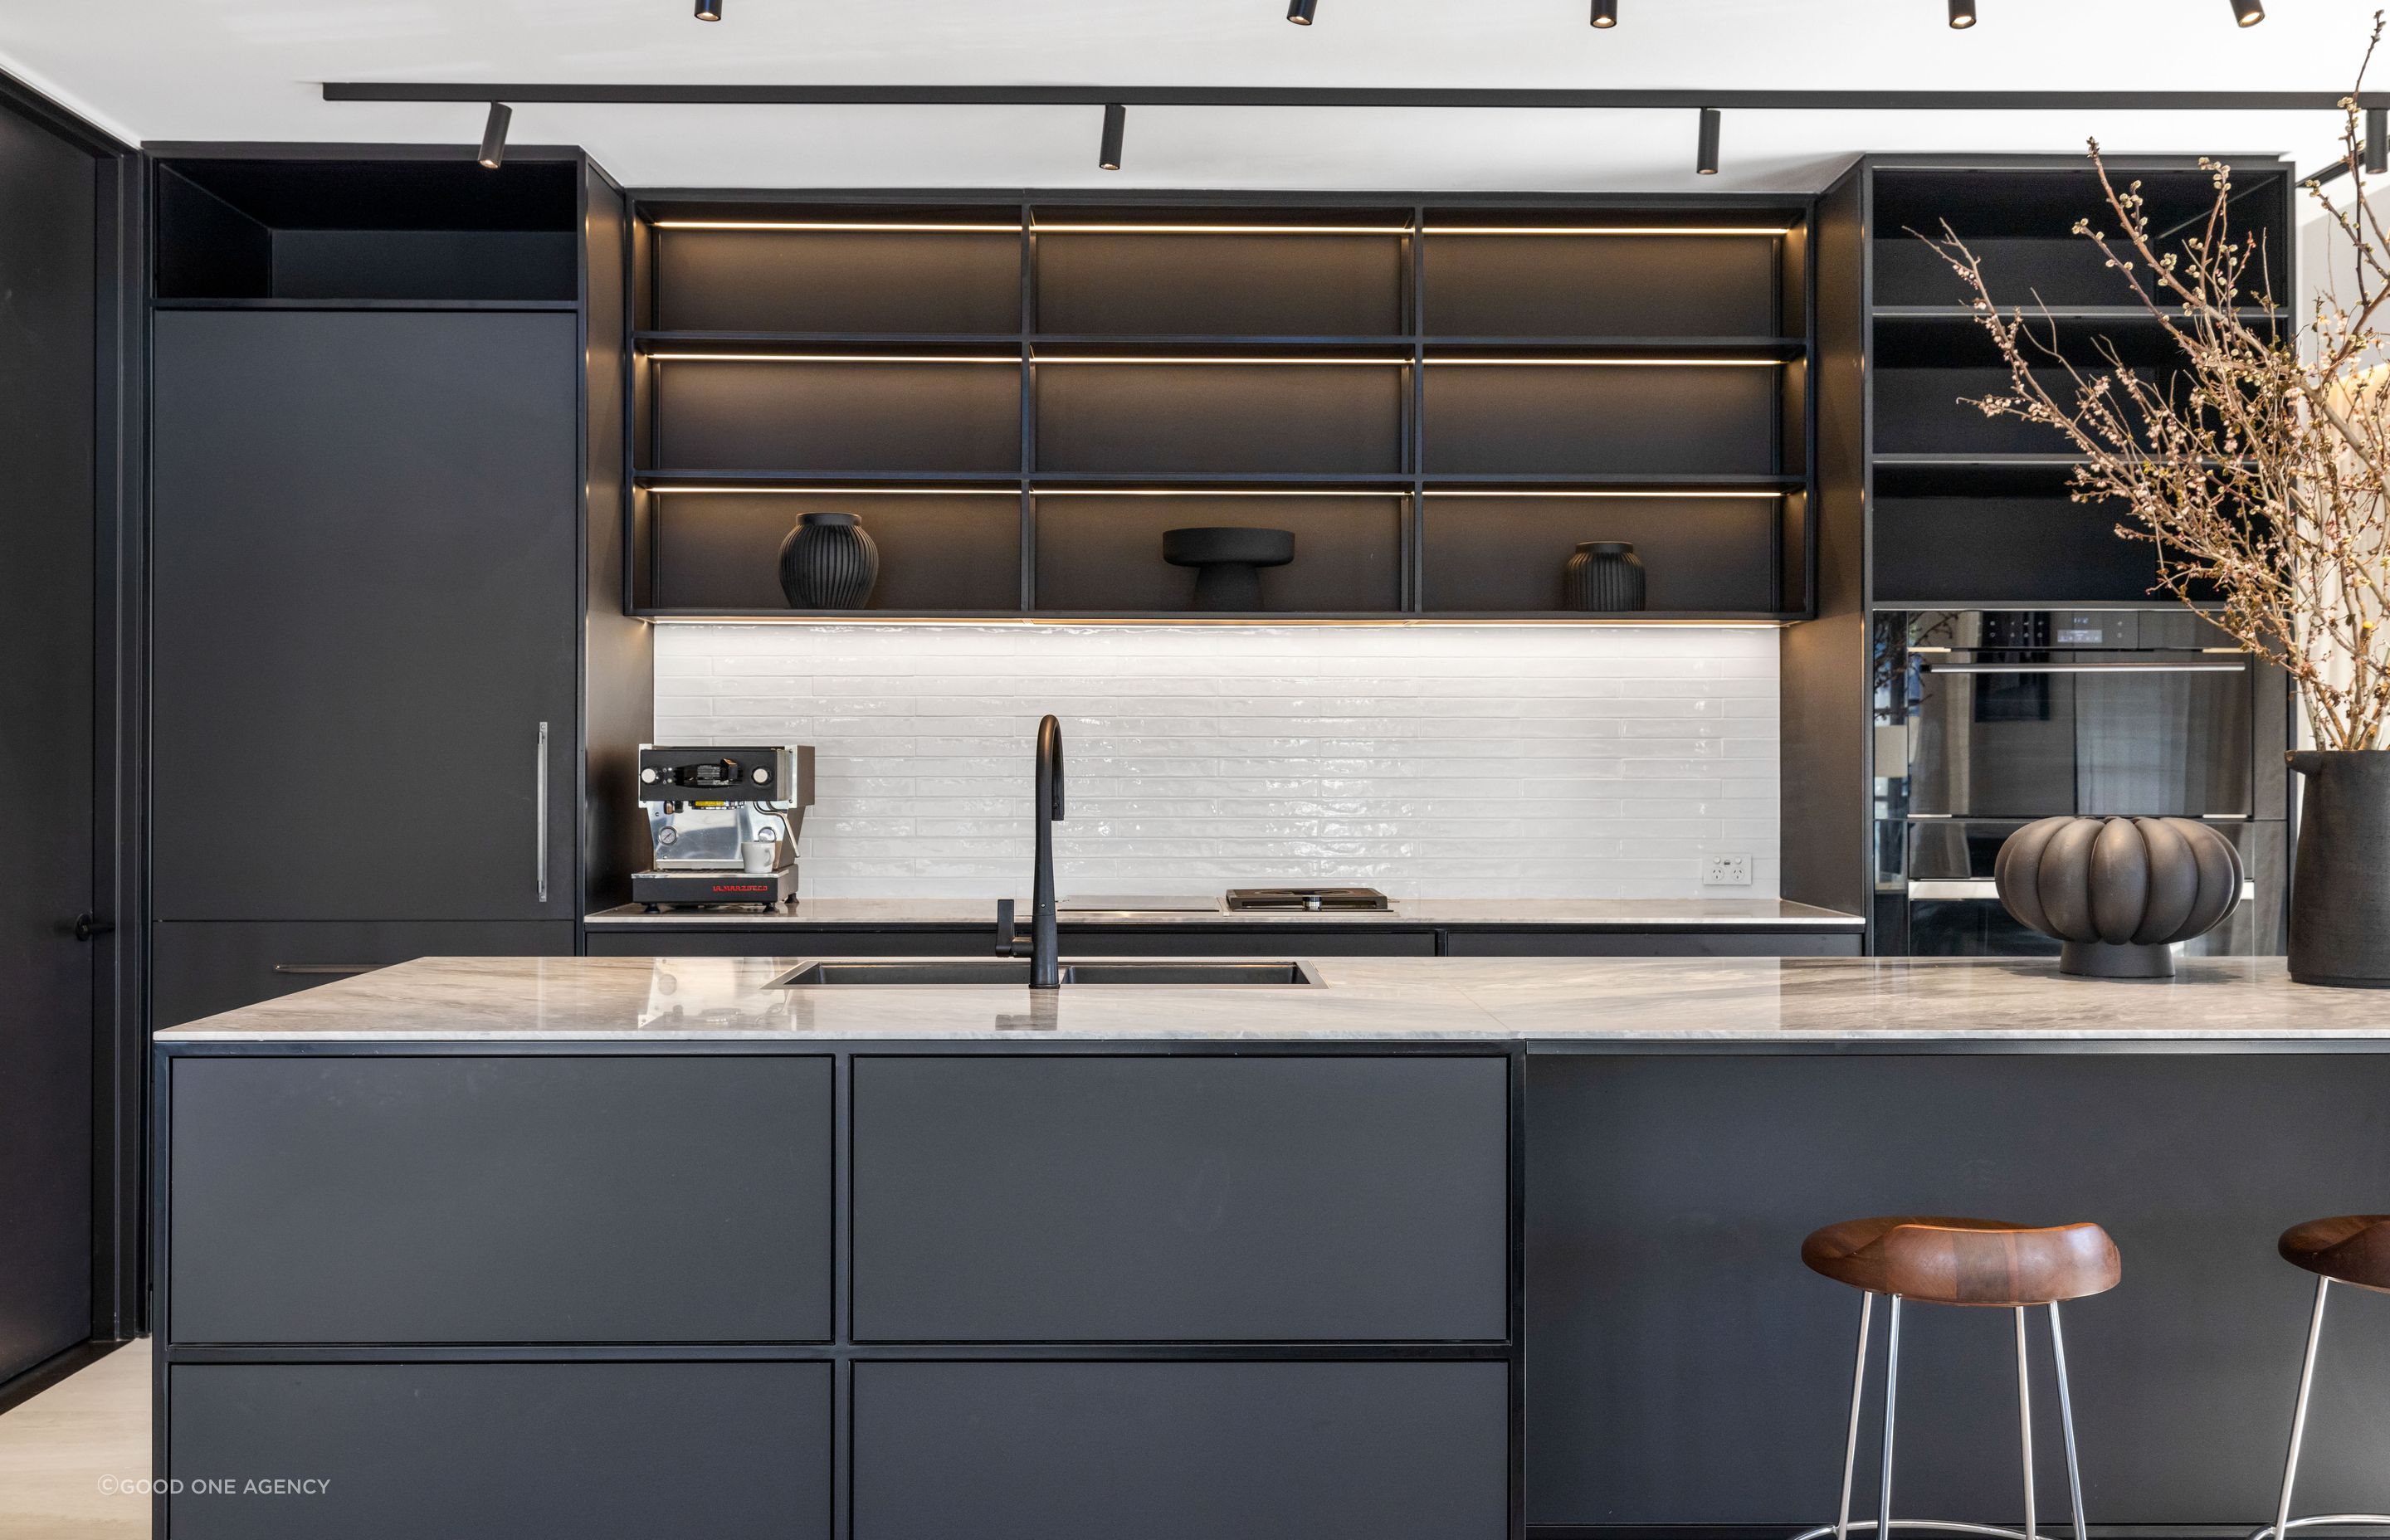 The monochromatic kitchen features black steel, tying beautifully with the steel joinery throughout the living space.